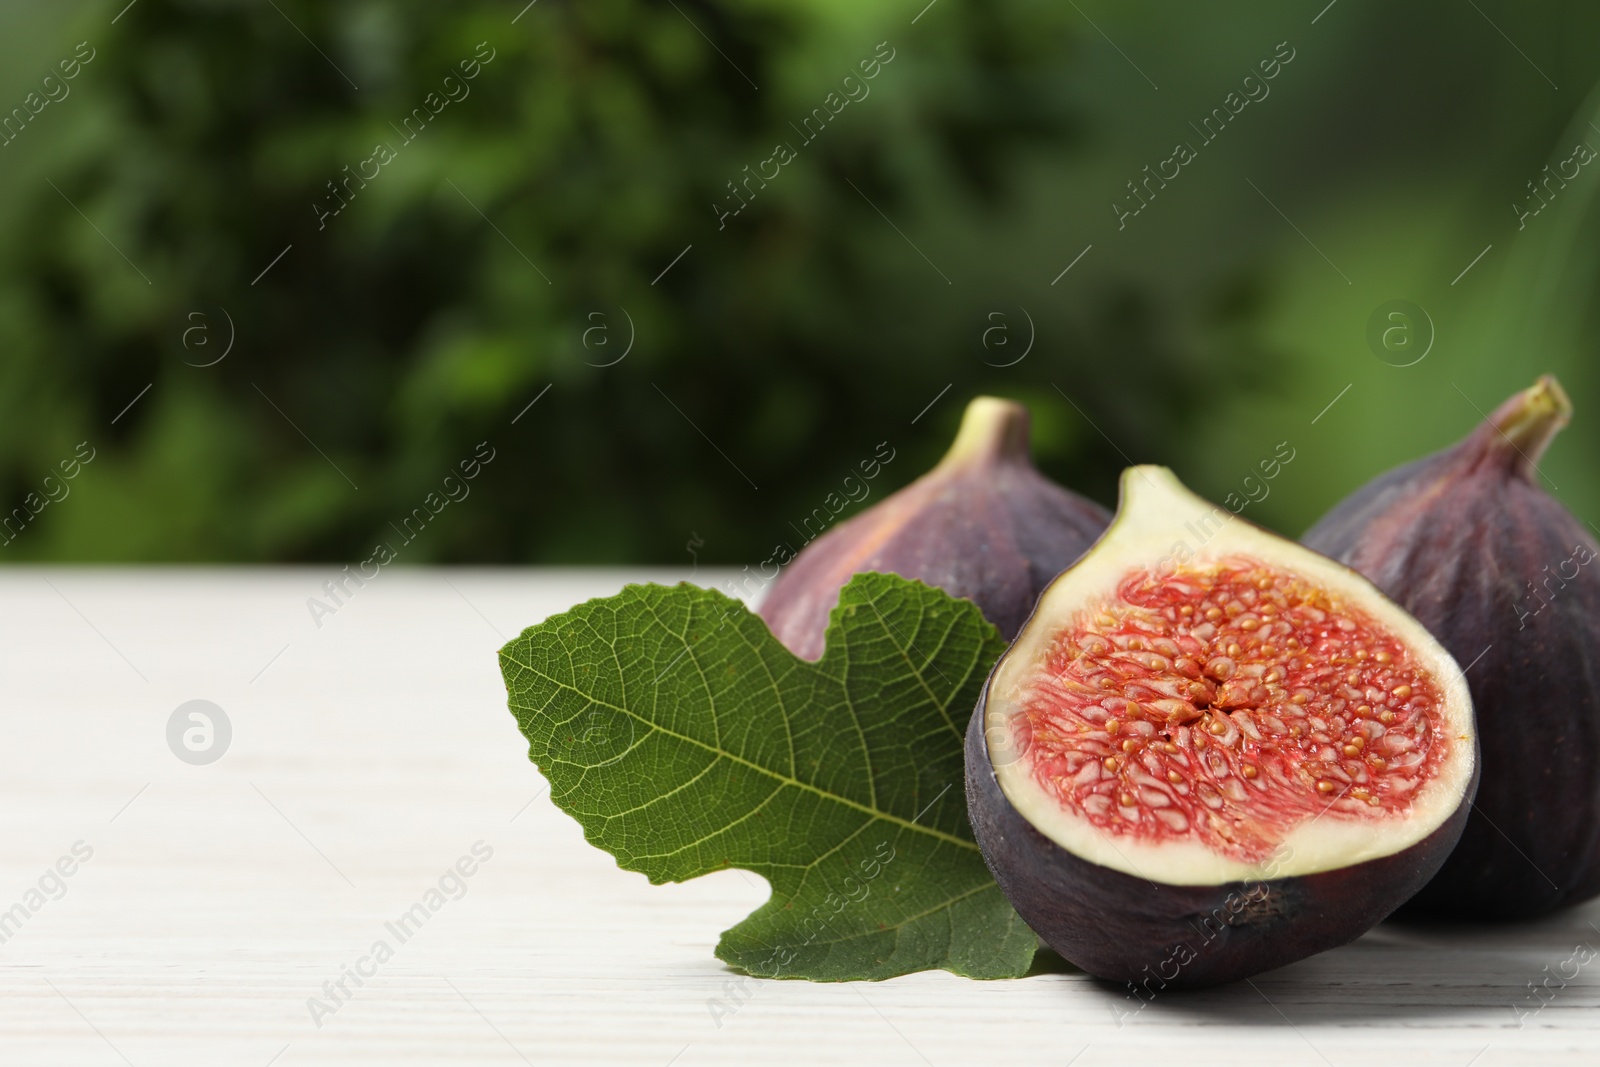 Photo of Whole and cut ripe figs with leaf on white wooden table against blurred green background, closeup. Space for text